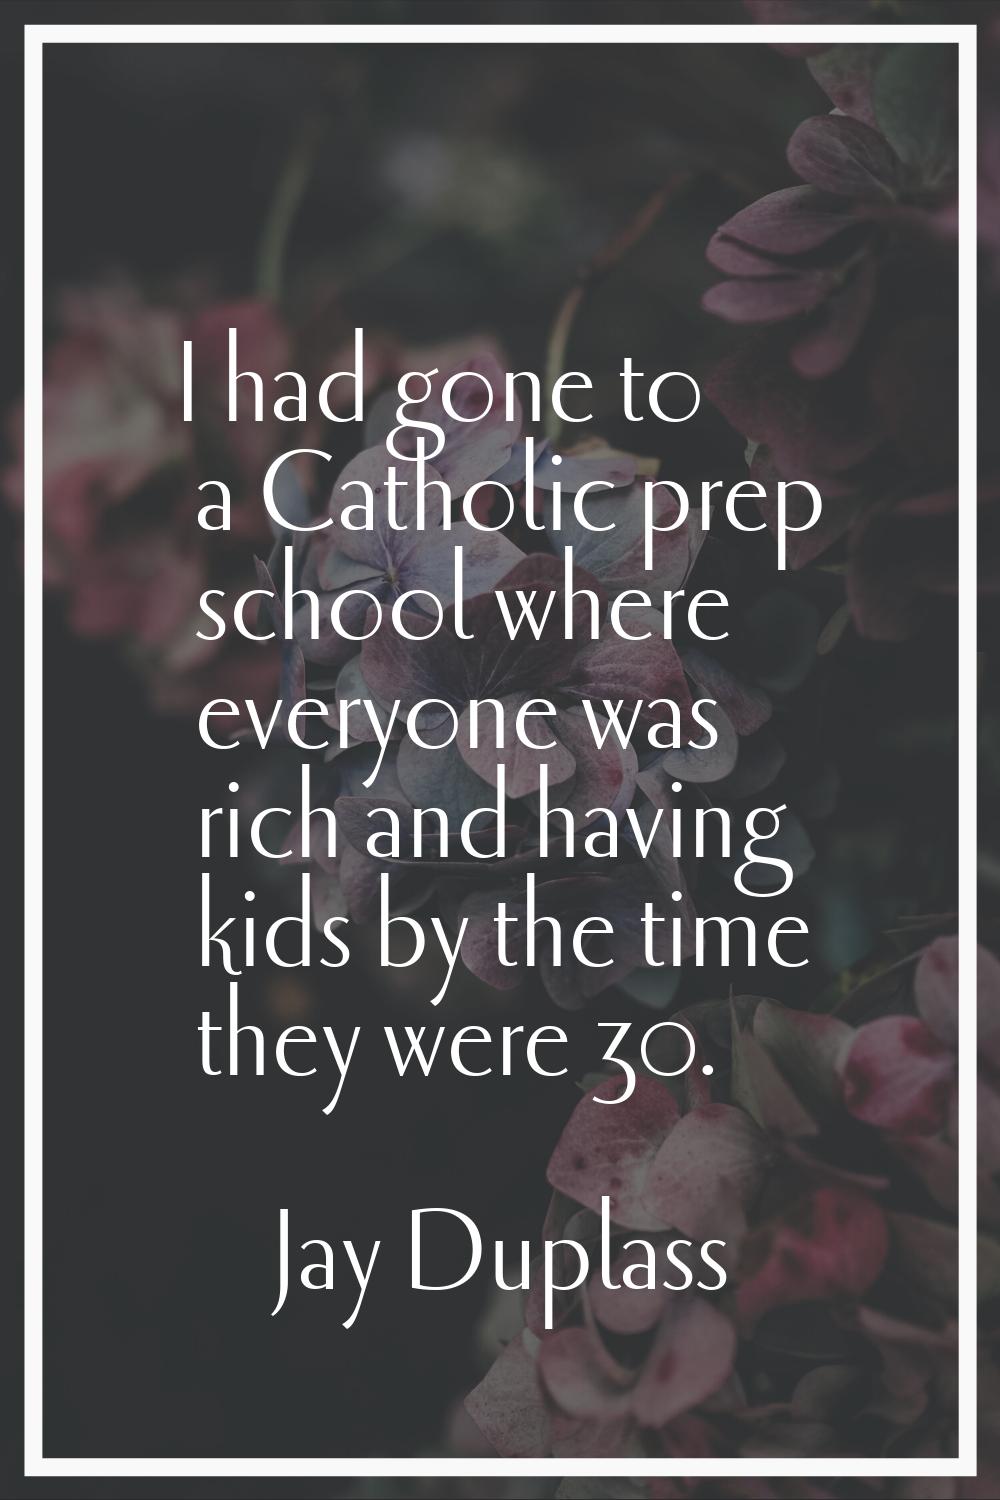 I had gone to a Catholic prep school where everyone was rich and having kids by the time they were 